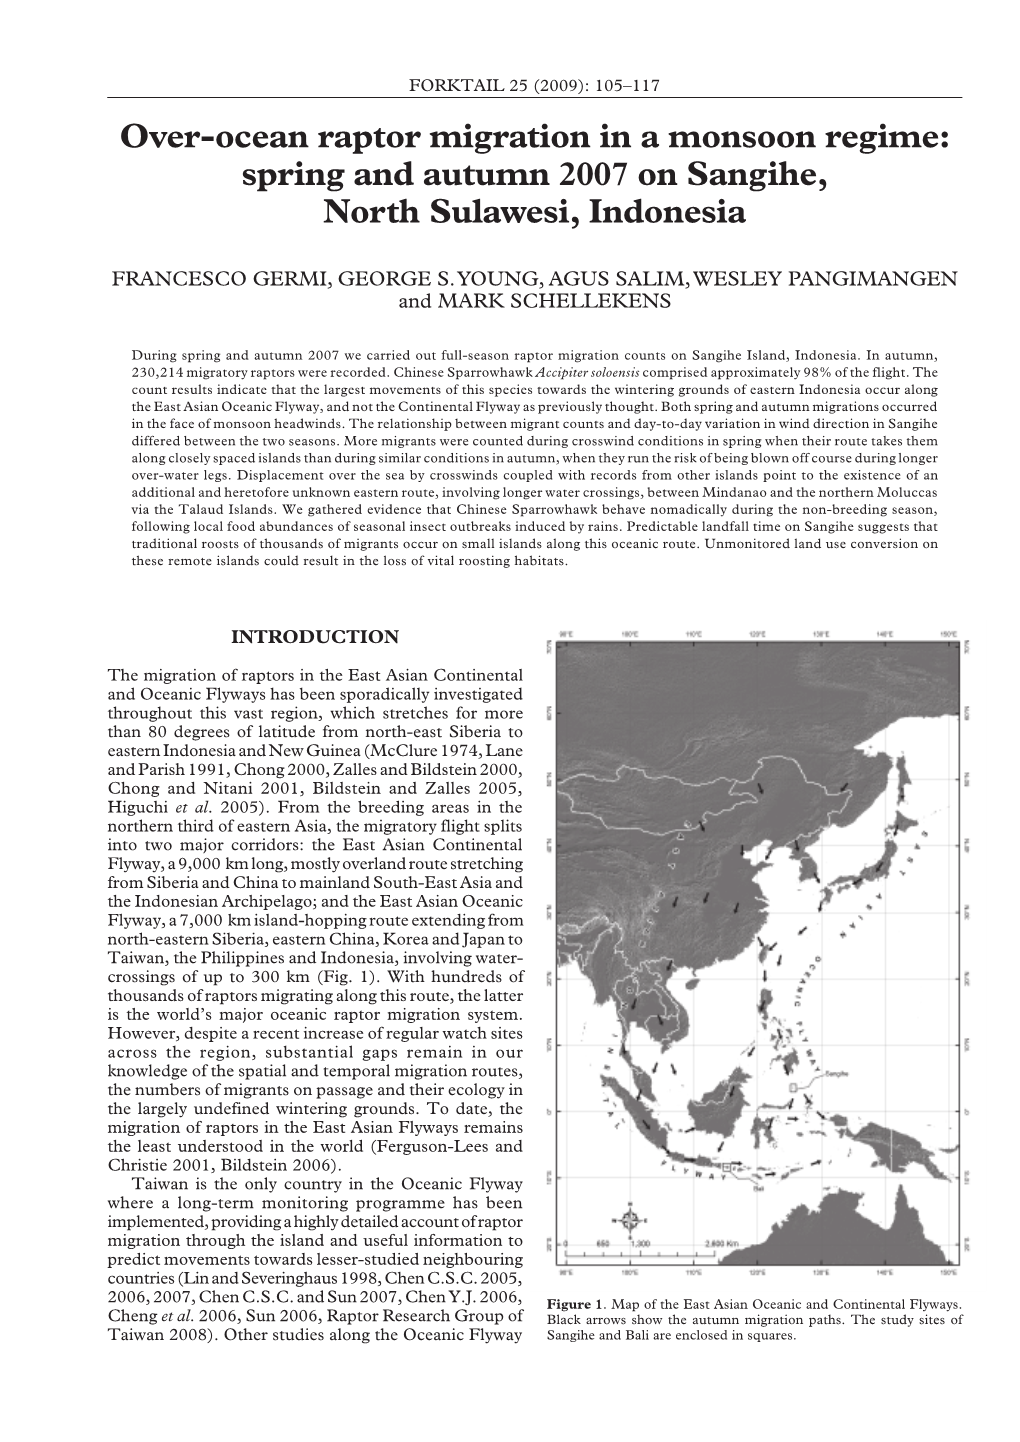 Over-Ocean Raptor Migration in a Monsoon Regime: Spring and Autumn 2007 on Sangihe, North Sulawesi, Indonesia